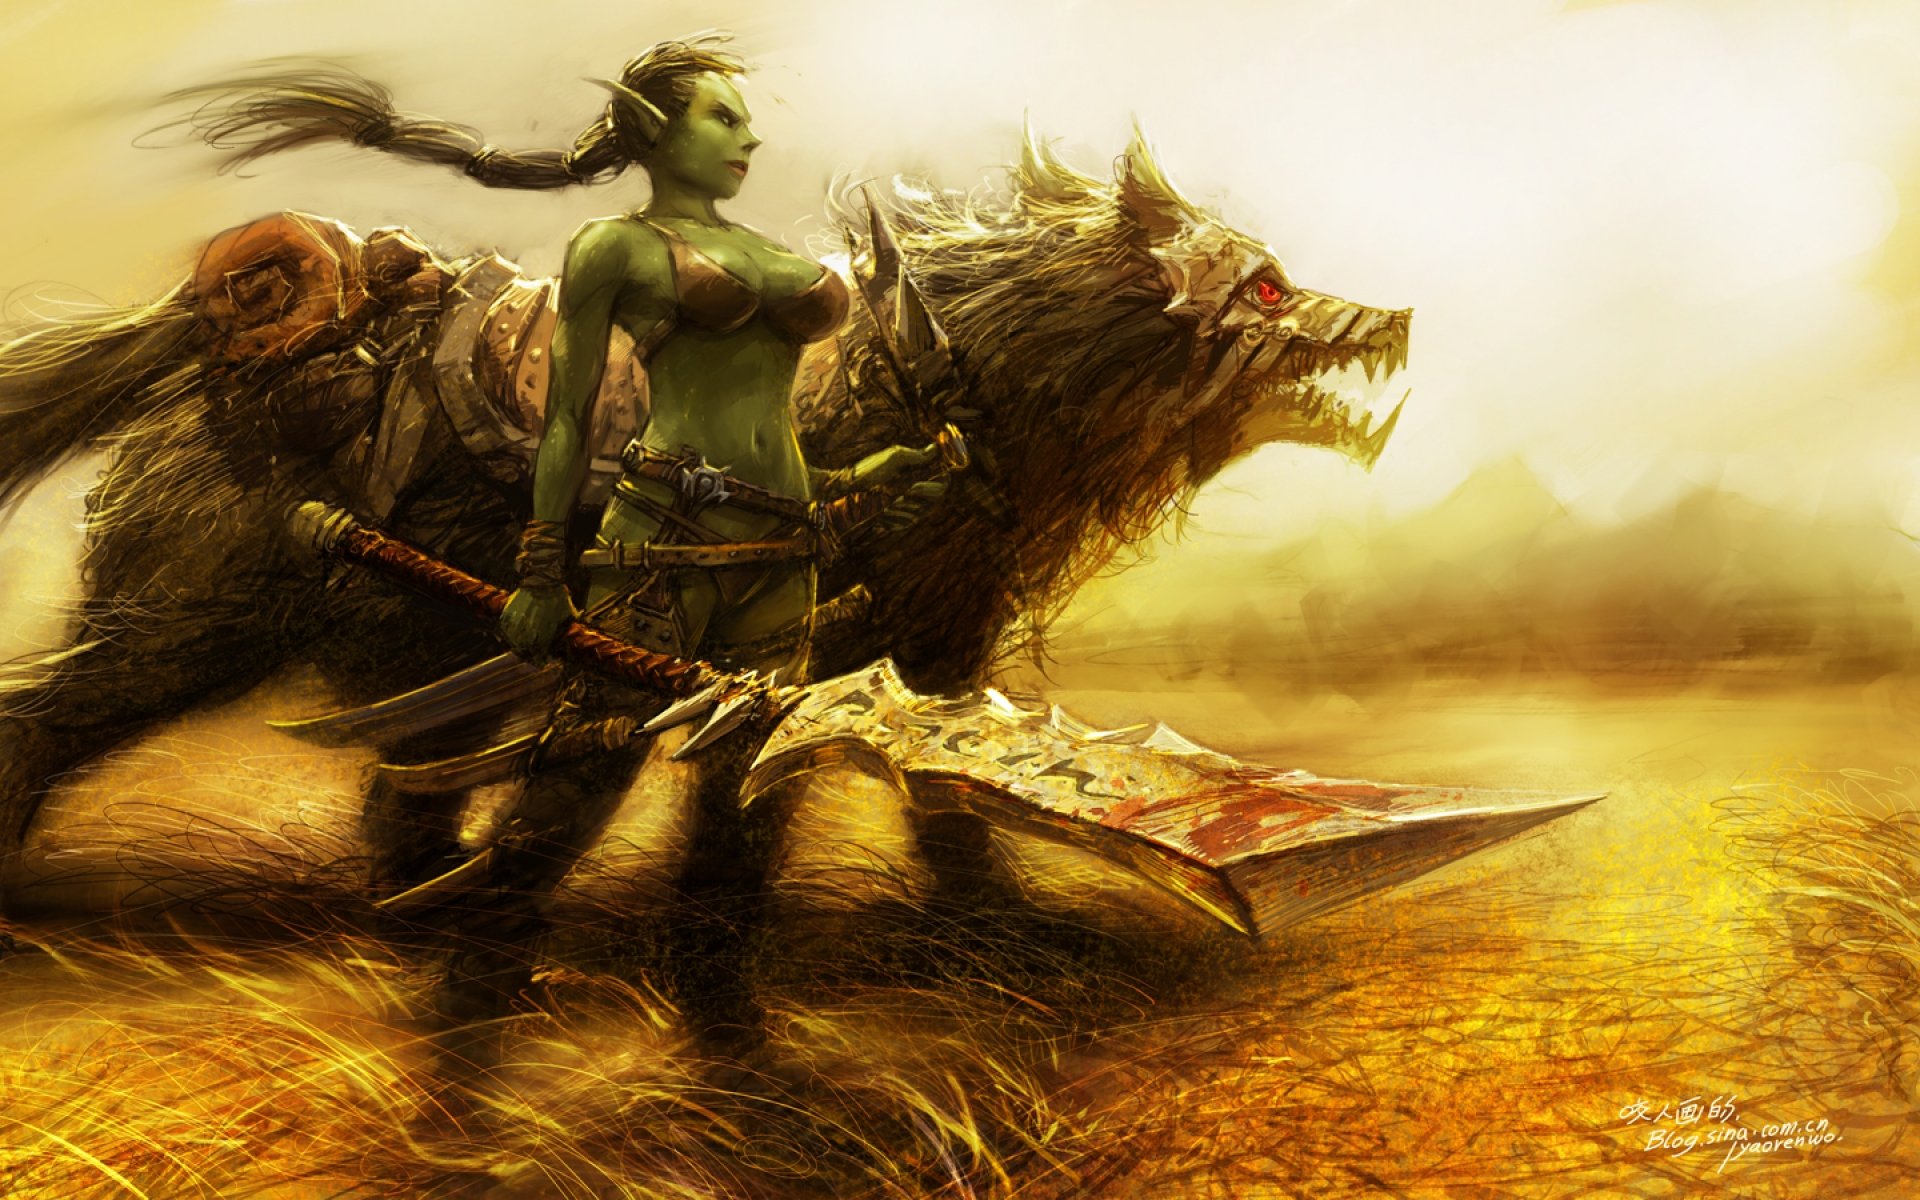 fantasy live wallpaper,action adventure game,cg artwork,strategy video game,mythology,warlord